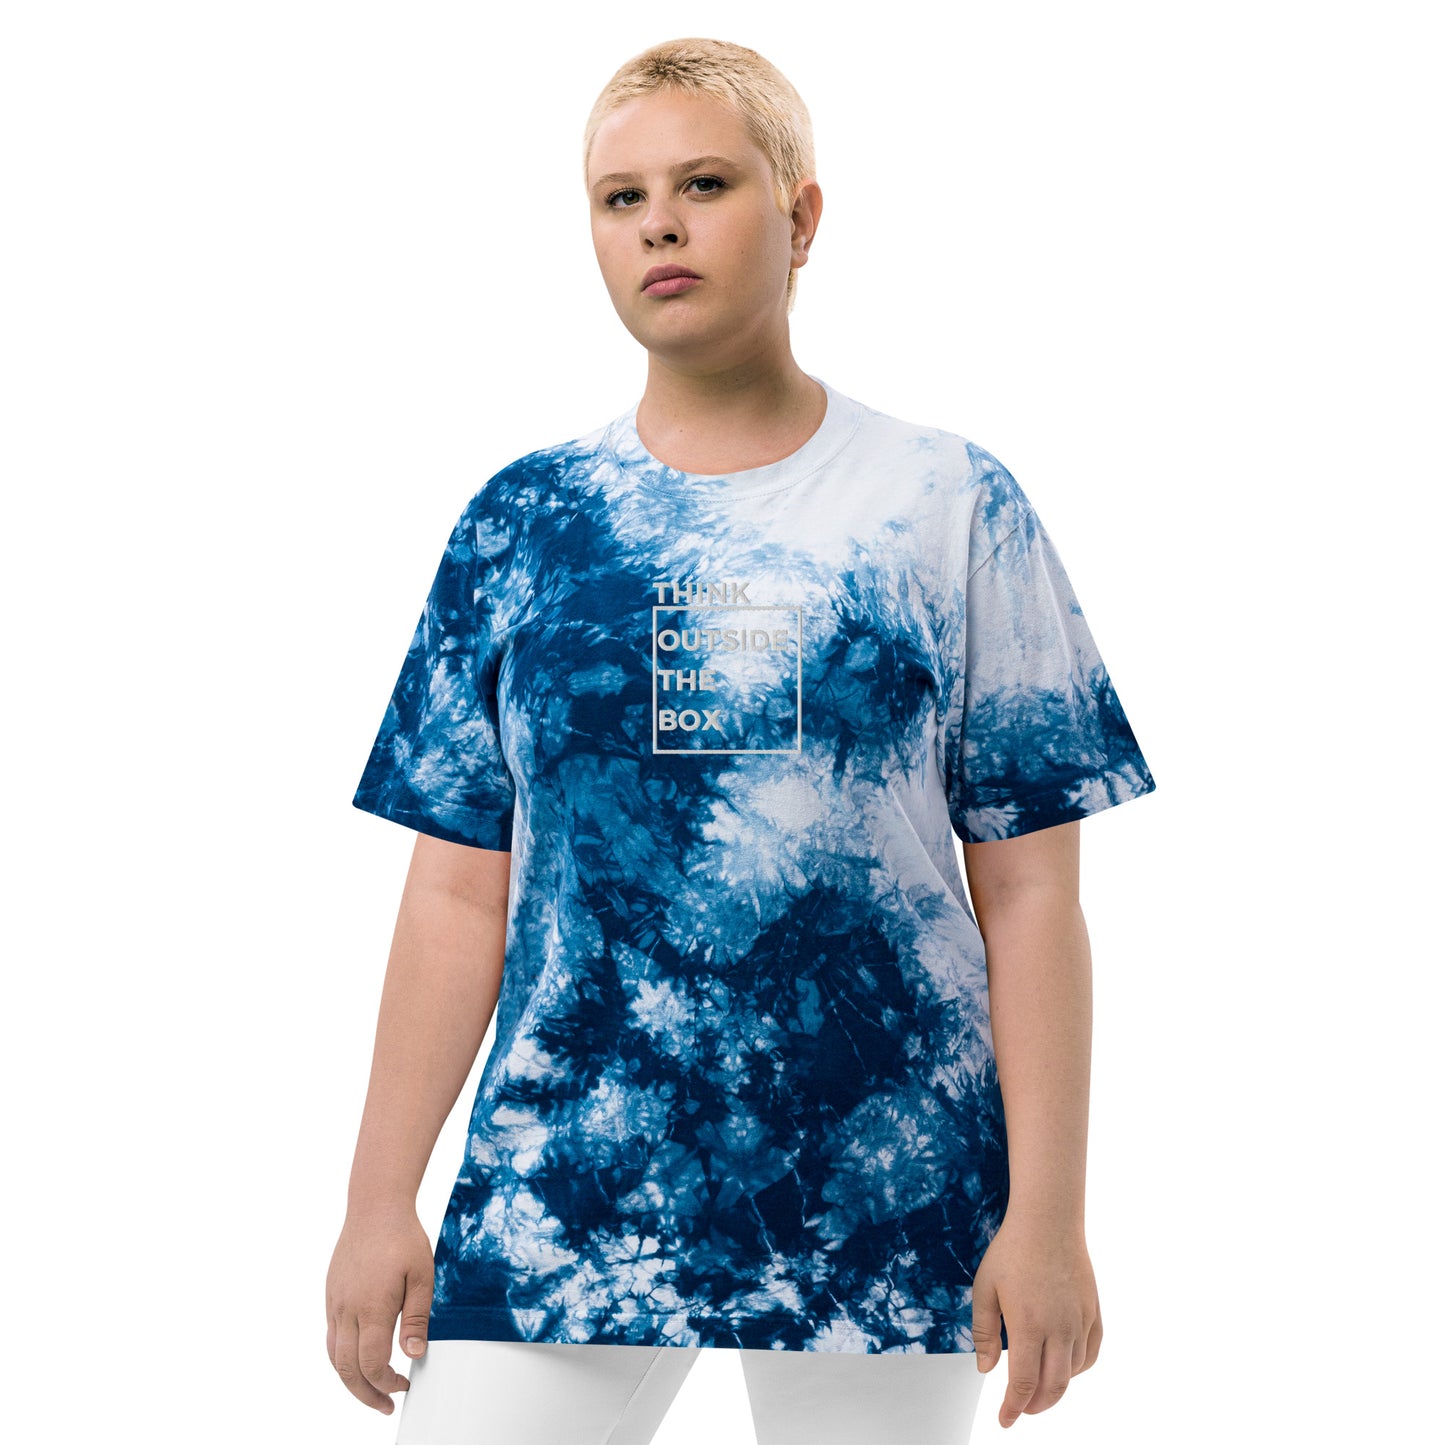 Think Outside the Box Oversized tie-dye t-shirt